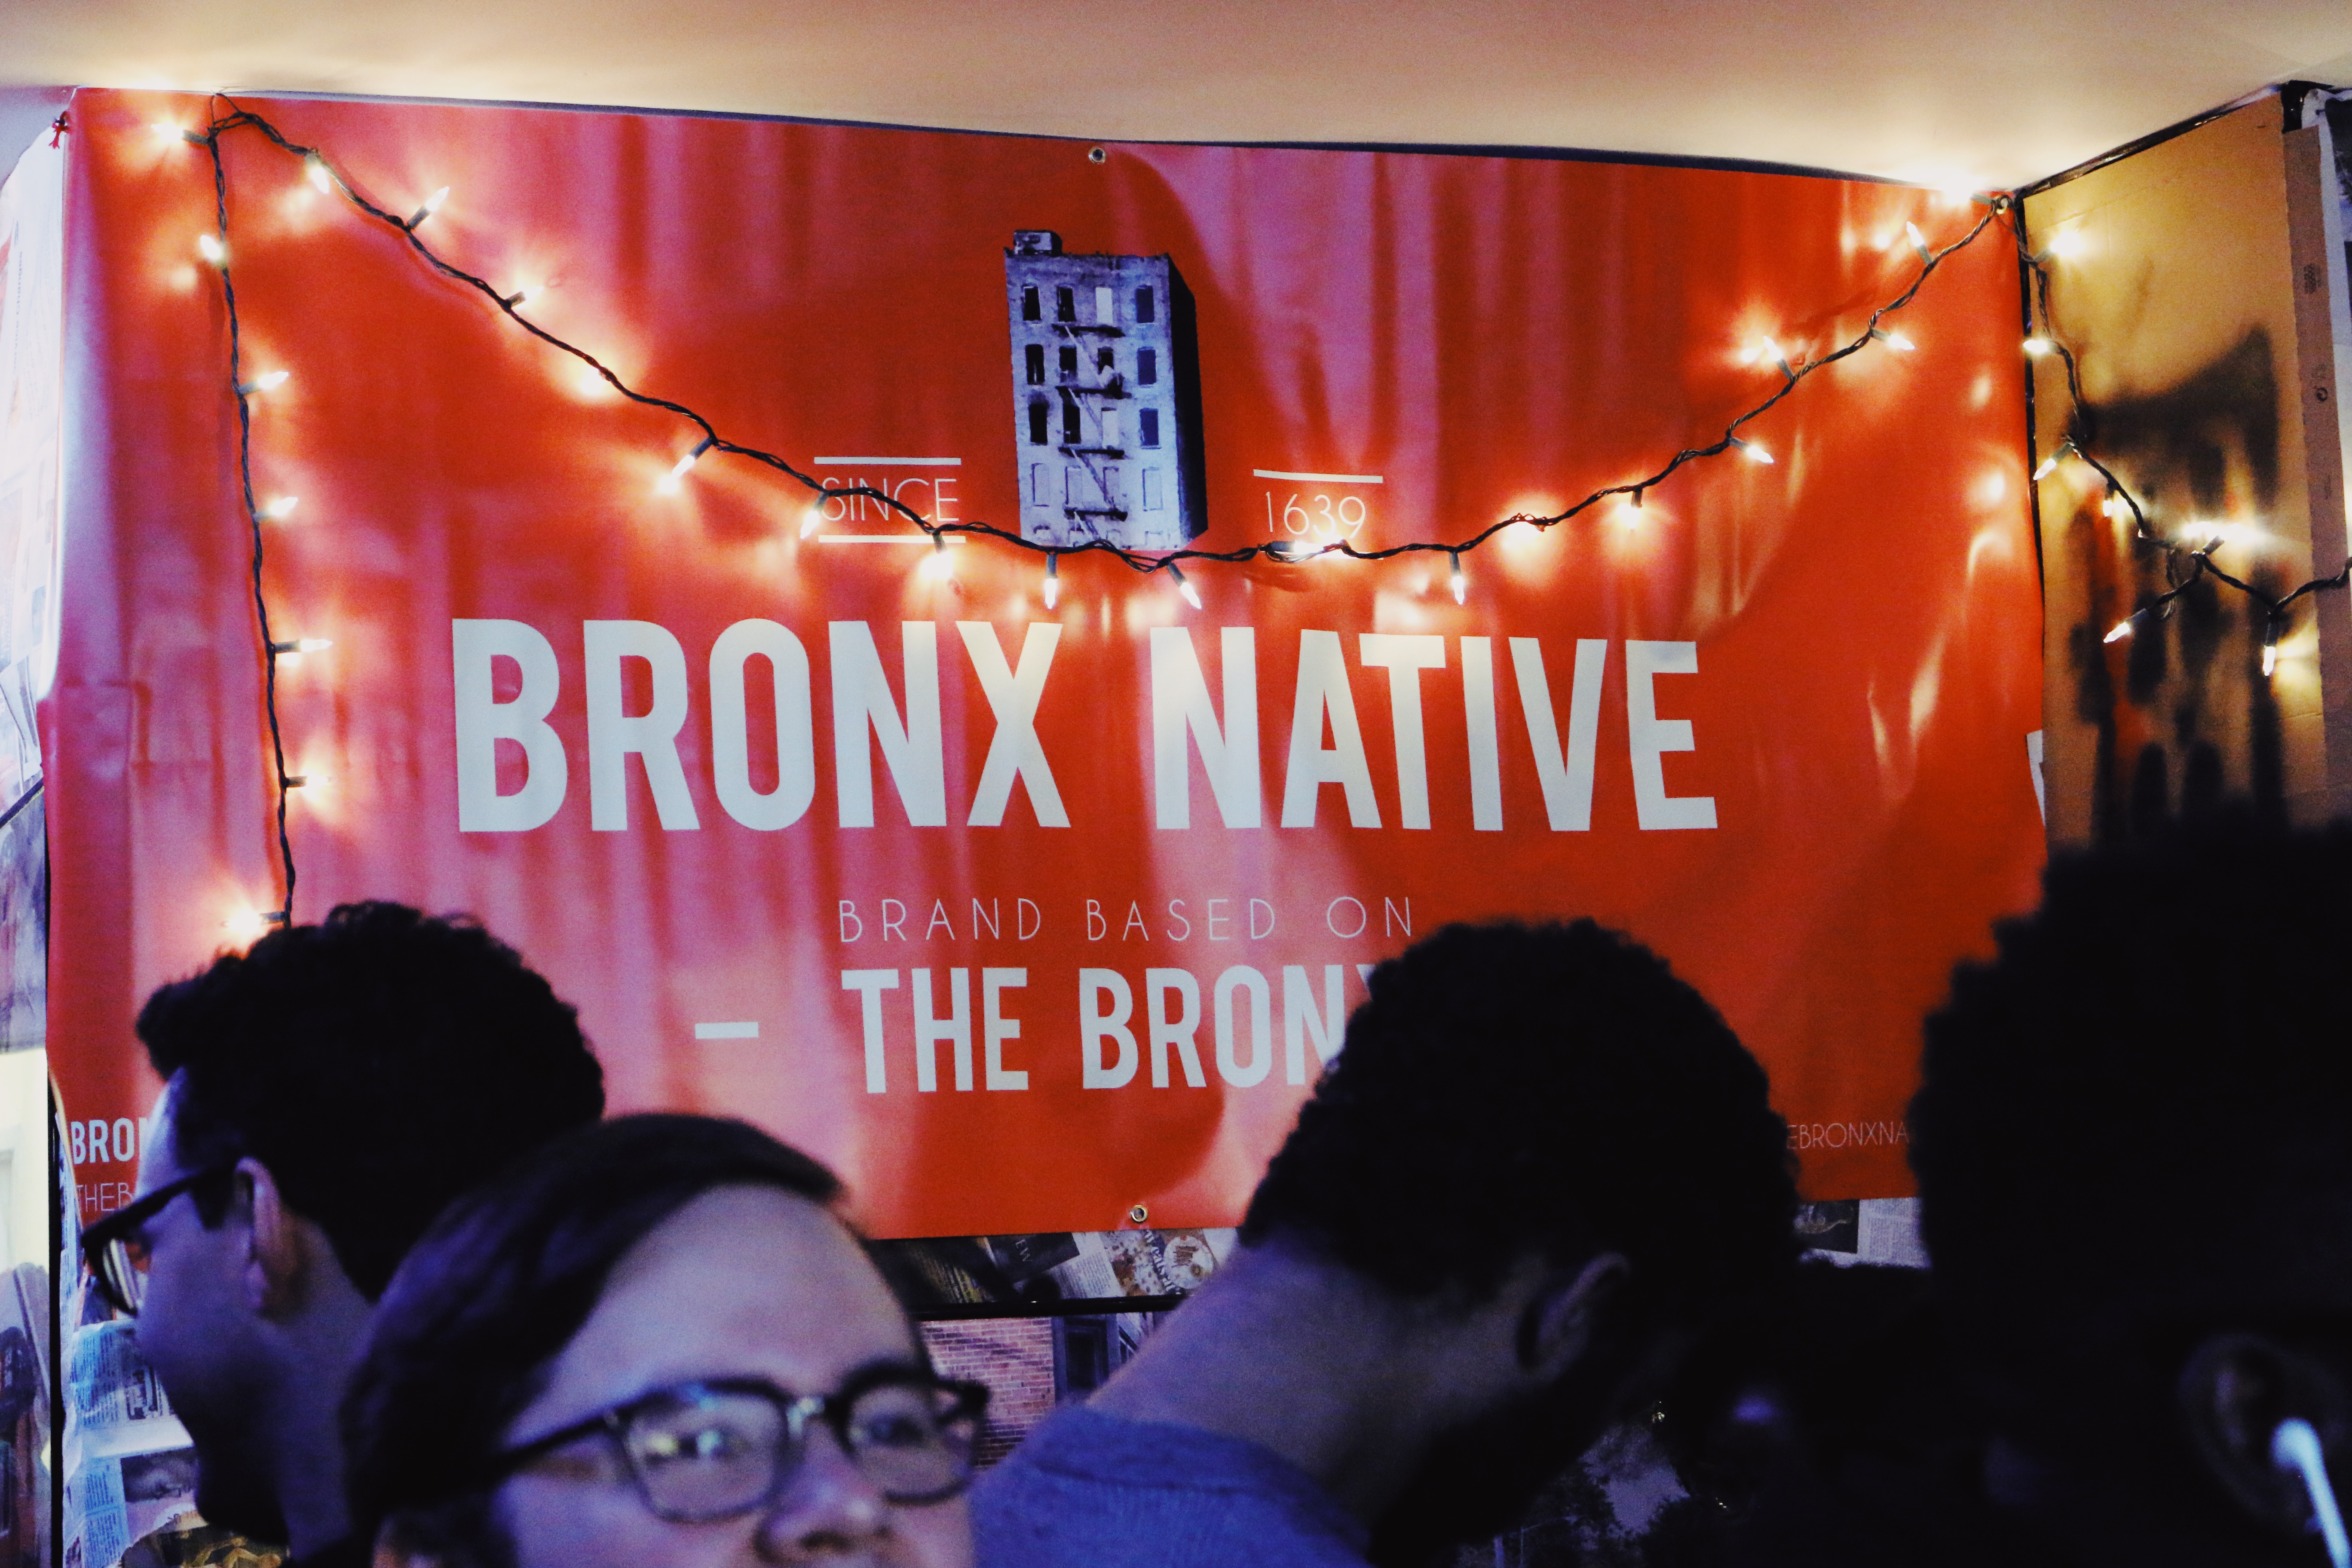 The Bronx Native brand from the bronx events in the bronx